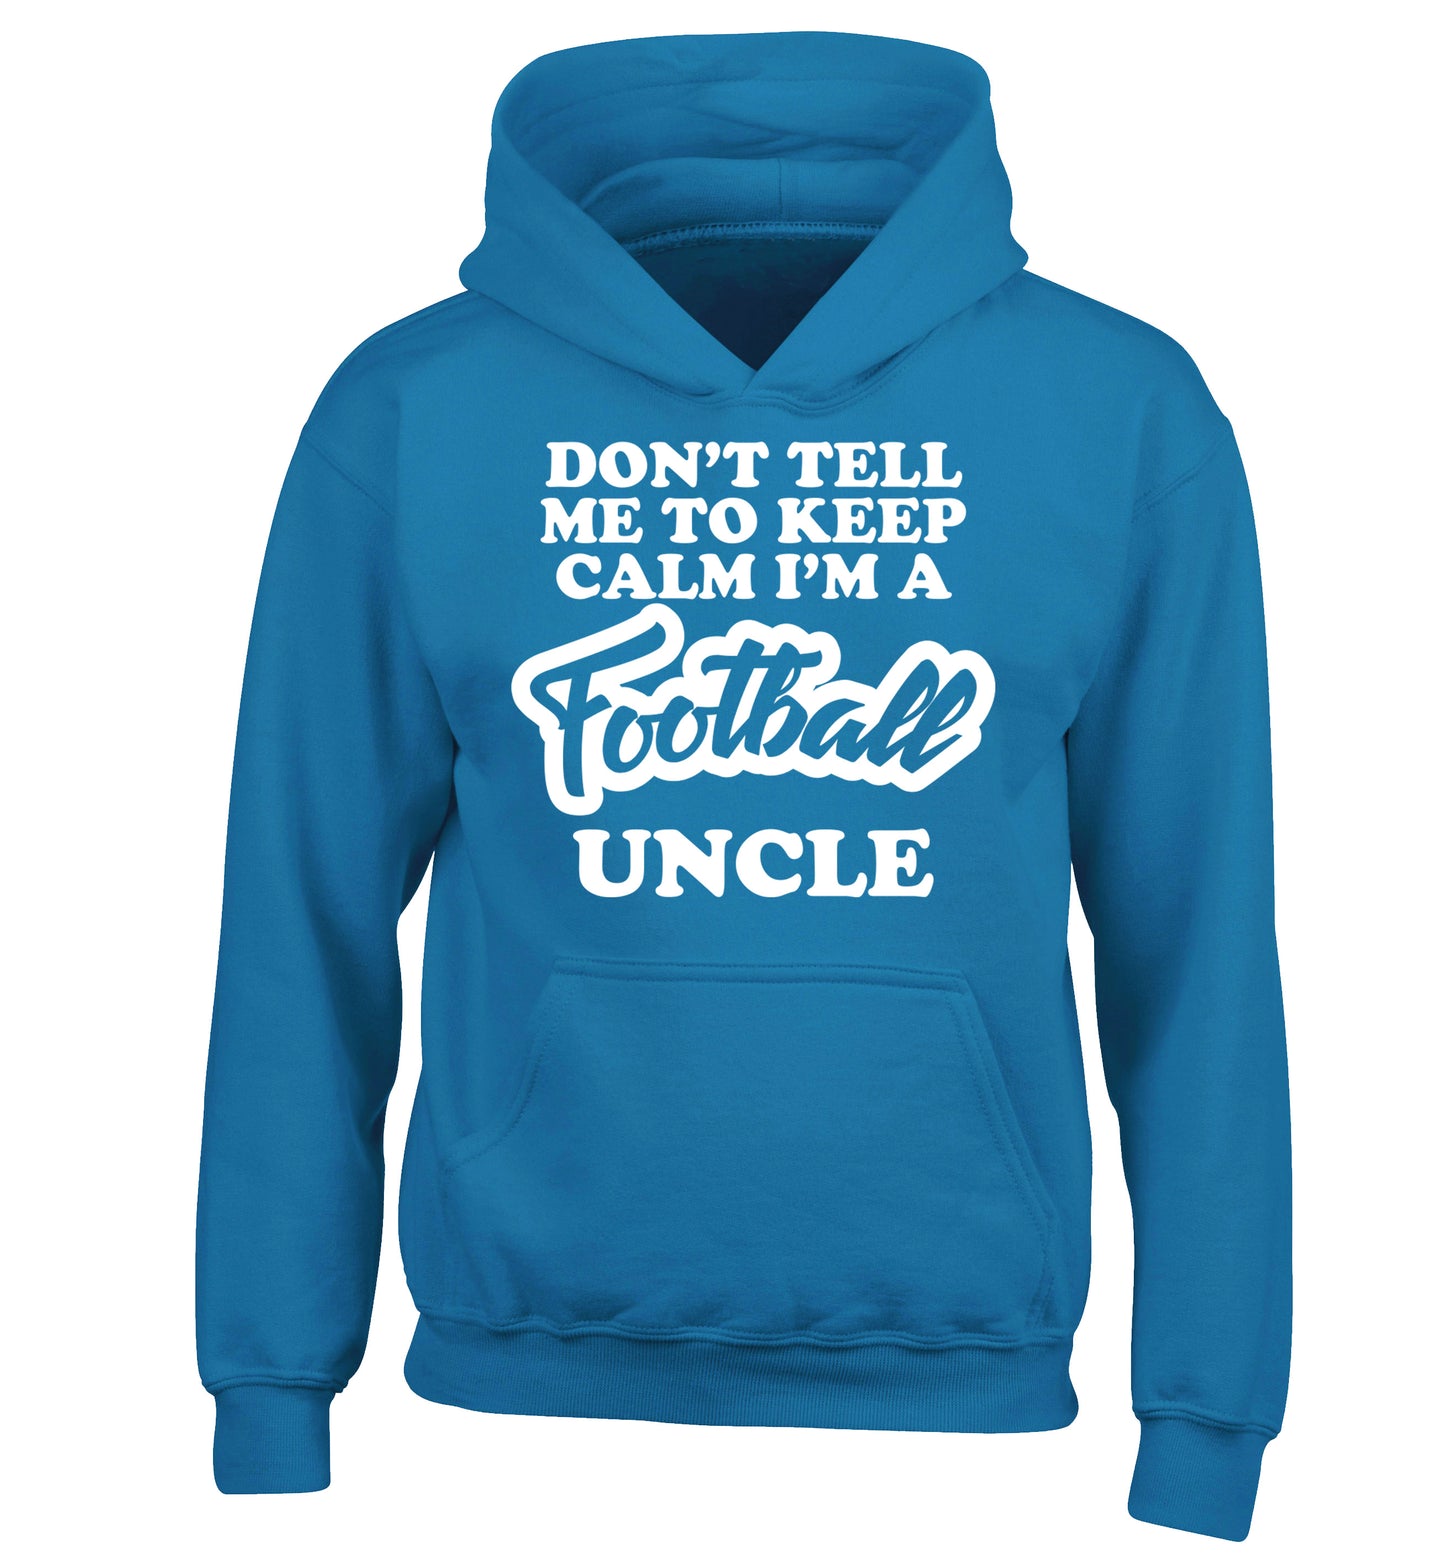 Worlds most amazing football uncle children's blue hoodie 12-14 Years